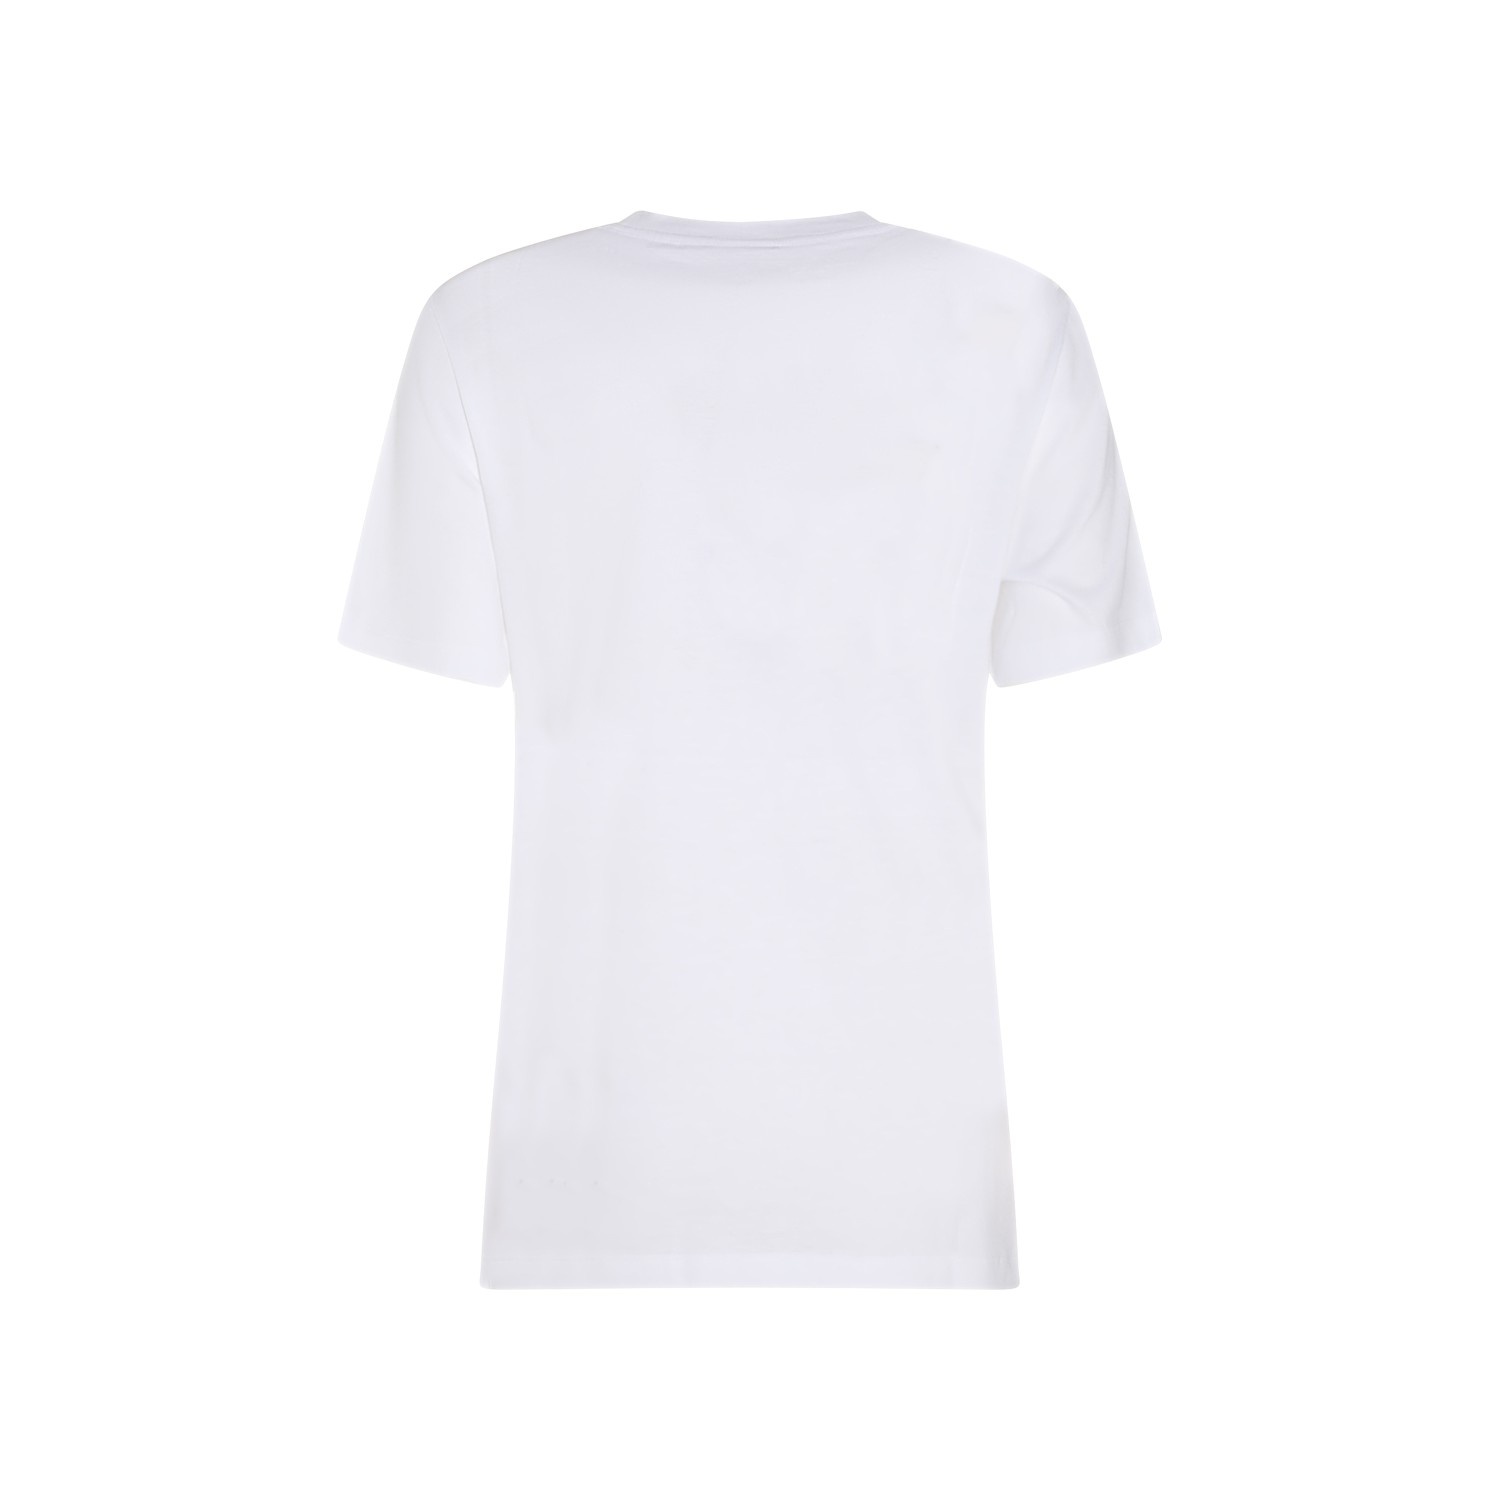 WHITE AND GOLD-TONE COTTON T-SHIRT - 2